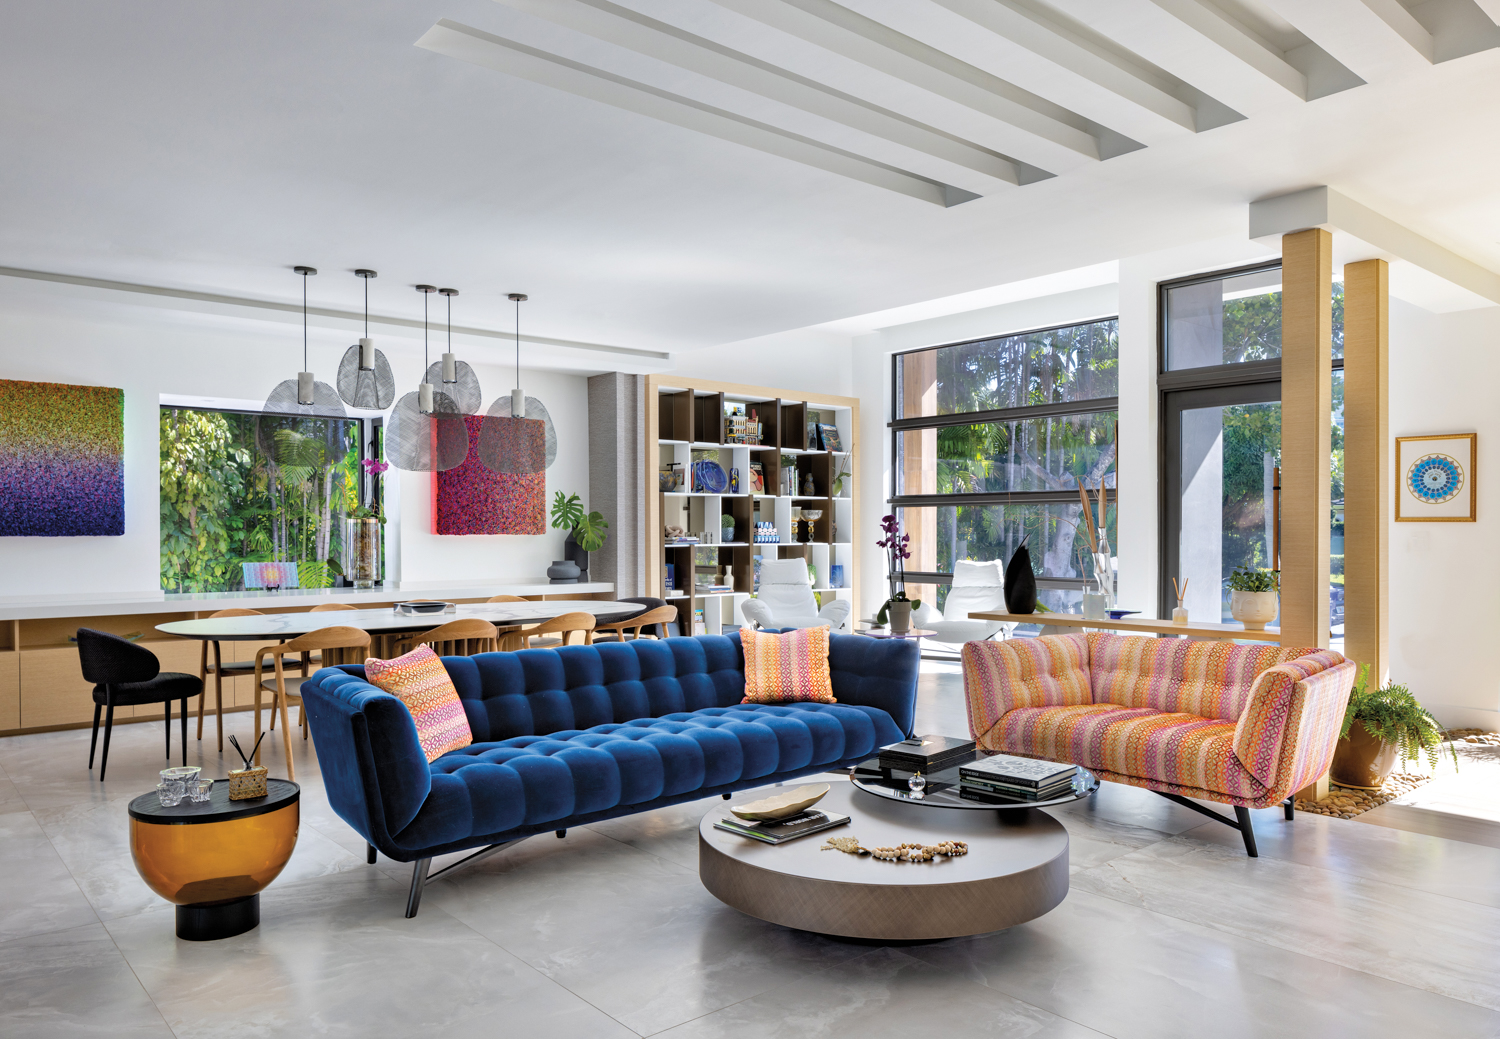 Midcentury To Modern: Taking A Miami Home To Colorful New Heights